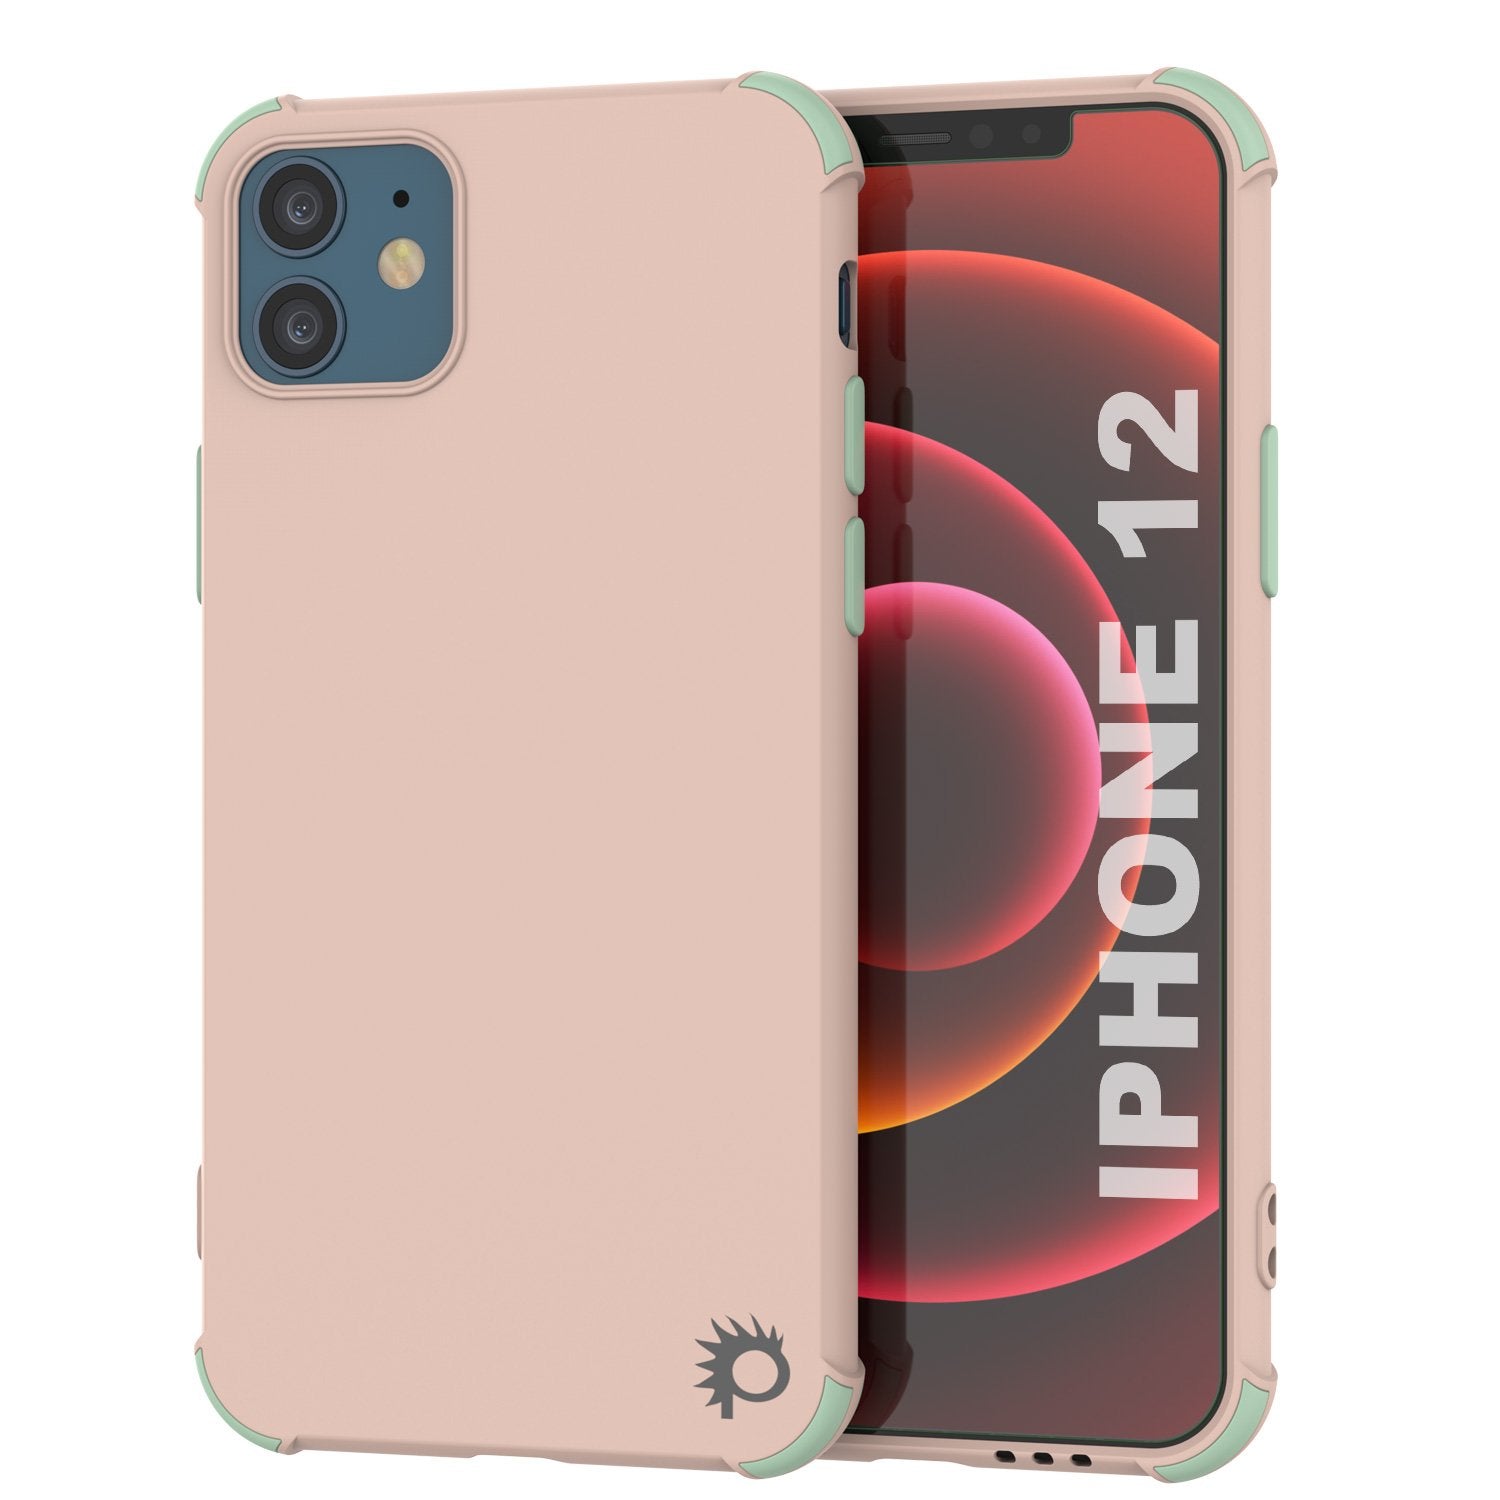 Punkcase Protective & Lightweight TPU Case [Sunshine Series] for iPhone 12 [Pink]